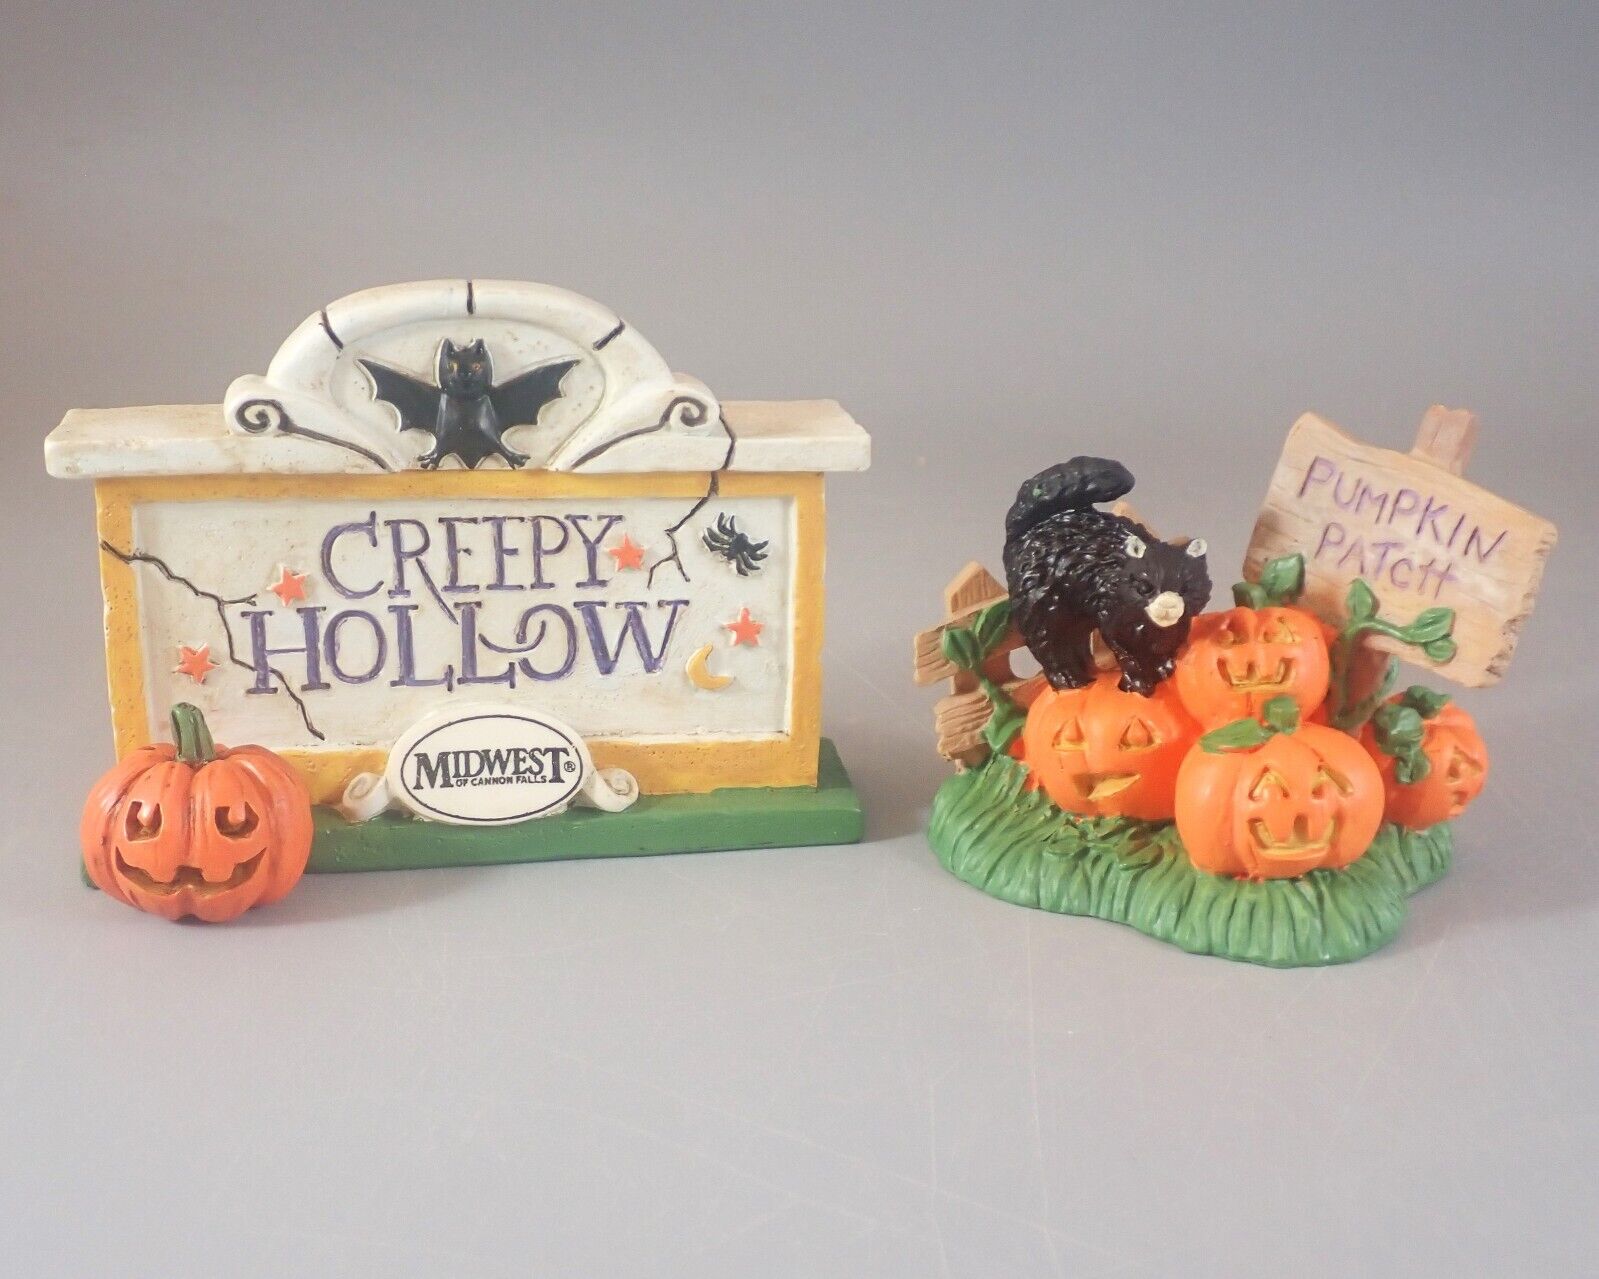 Creepy Hollow Village & Pumpkin Patch Signs Halloween Midwest of Cannon Falls